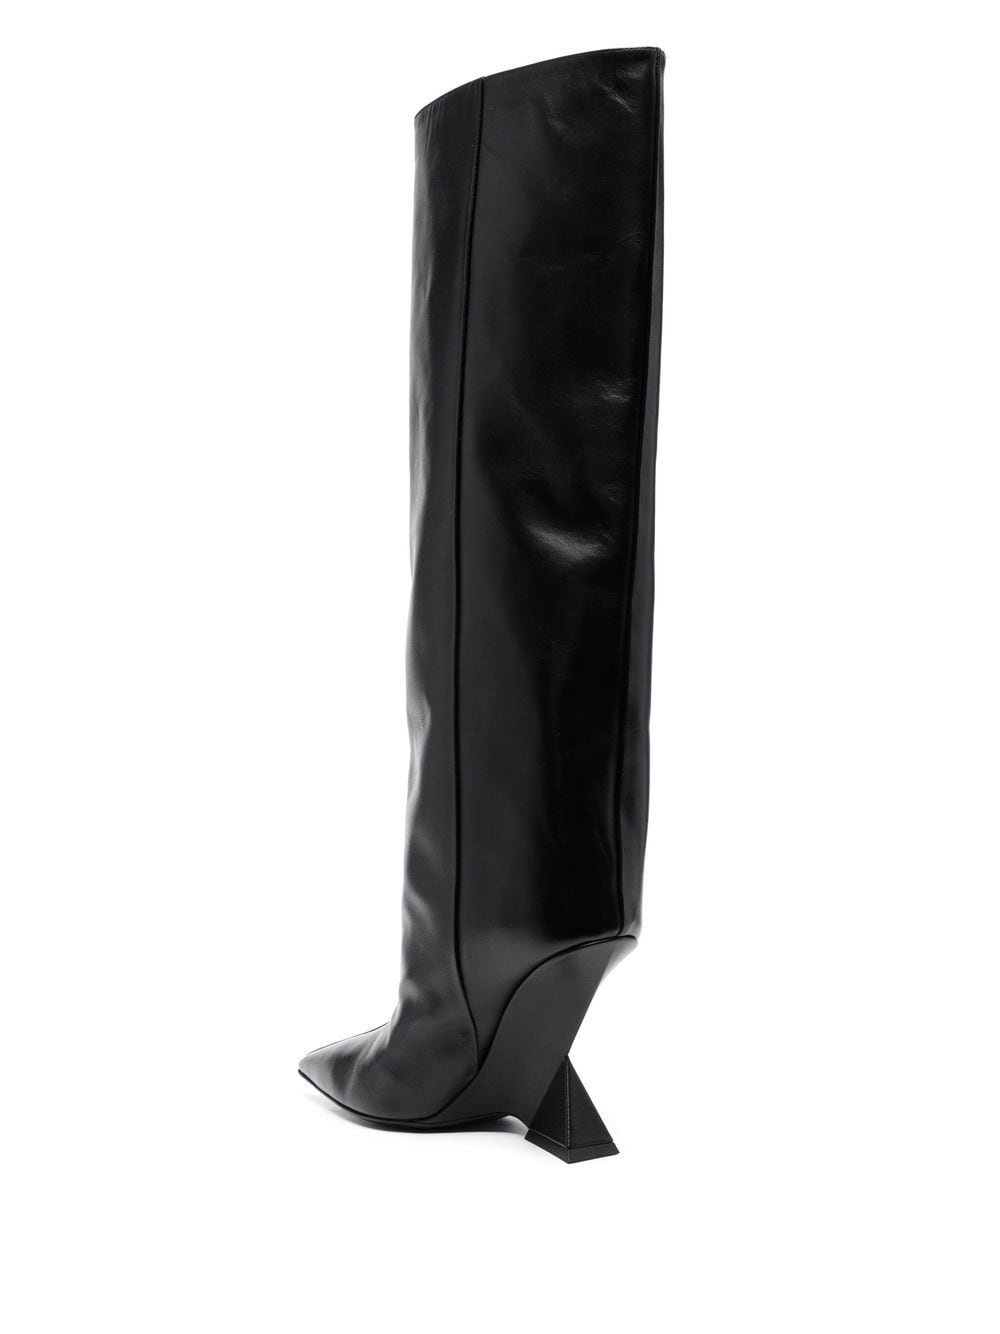 Cheope knee-high 105mm boots - 3